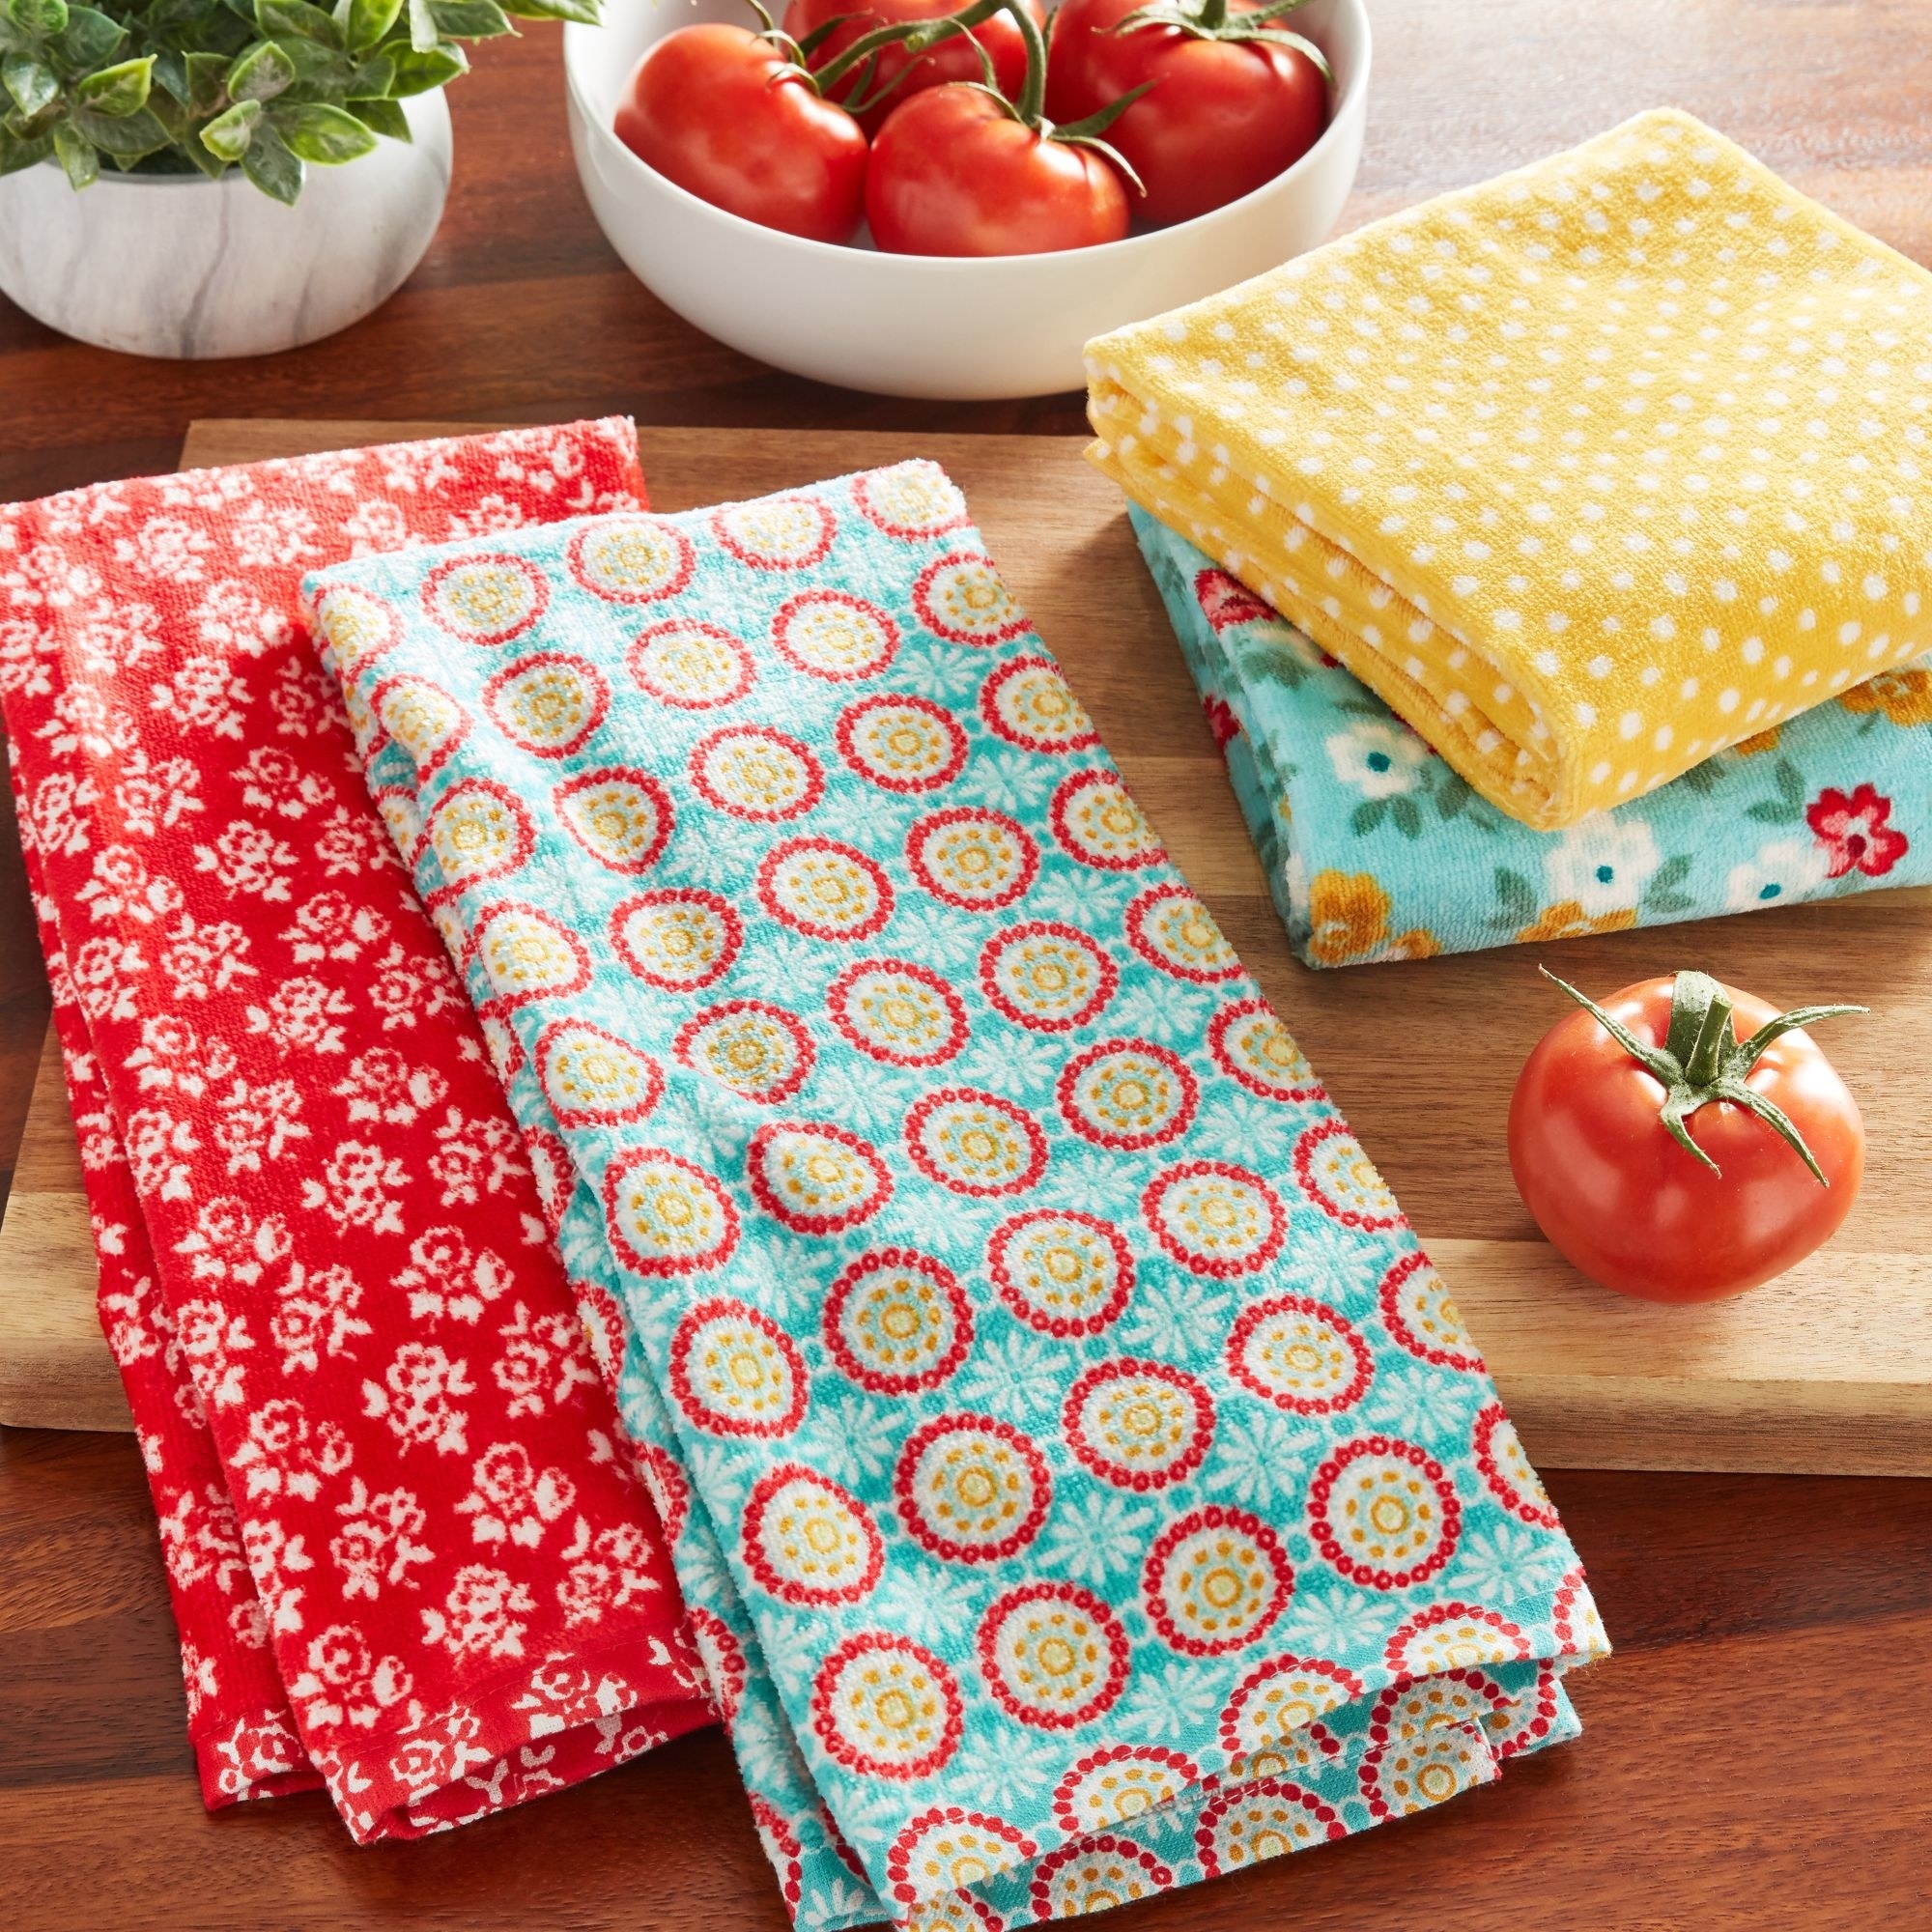 the kitchen towel set with one red and white towel, one yellow with polka dots, and one blue with a red and yellow flower pattern